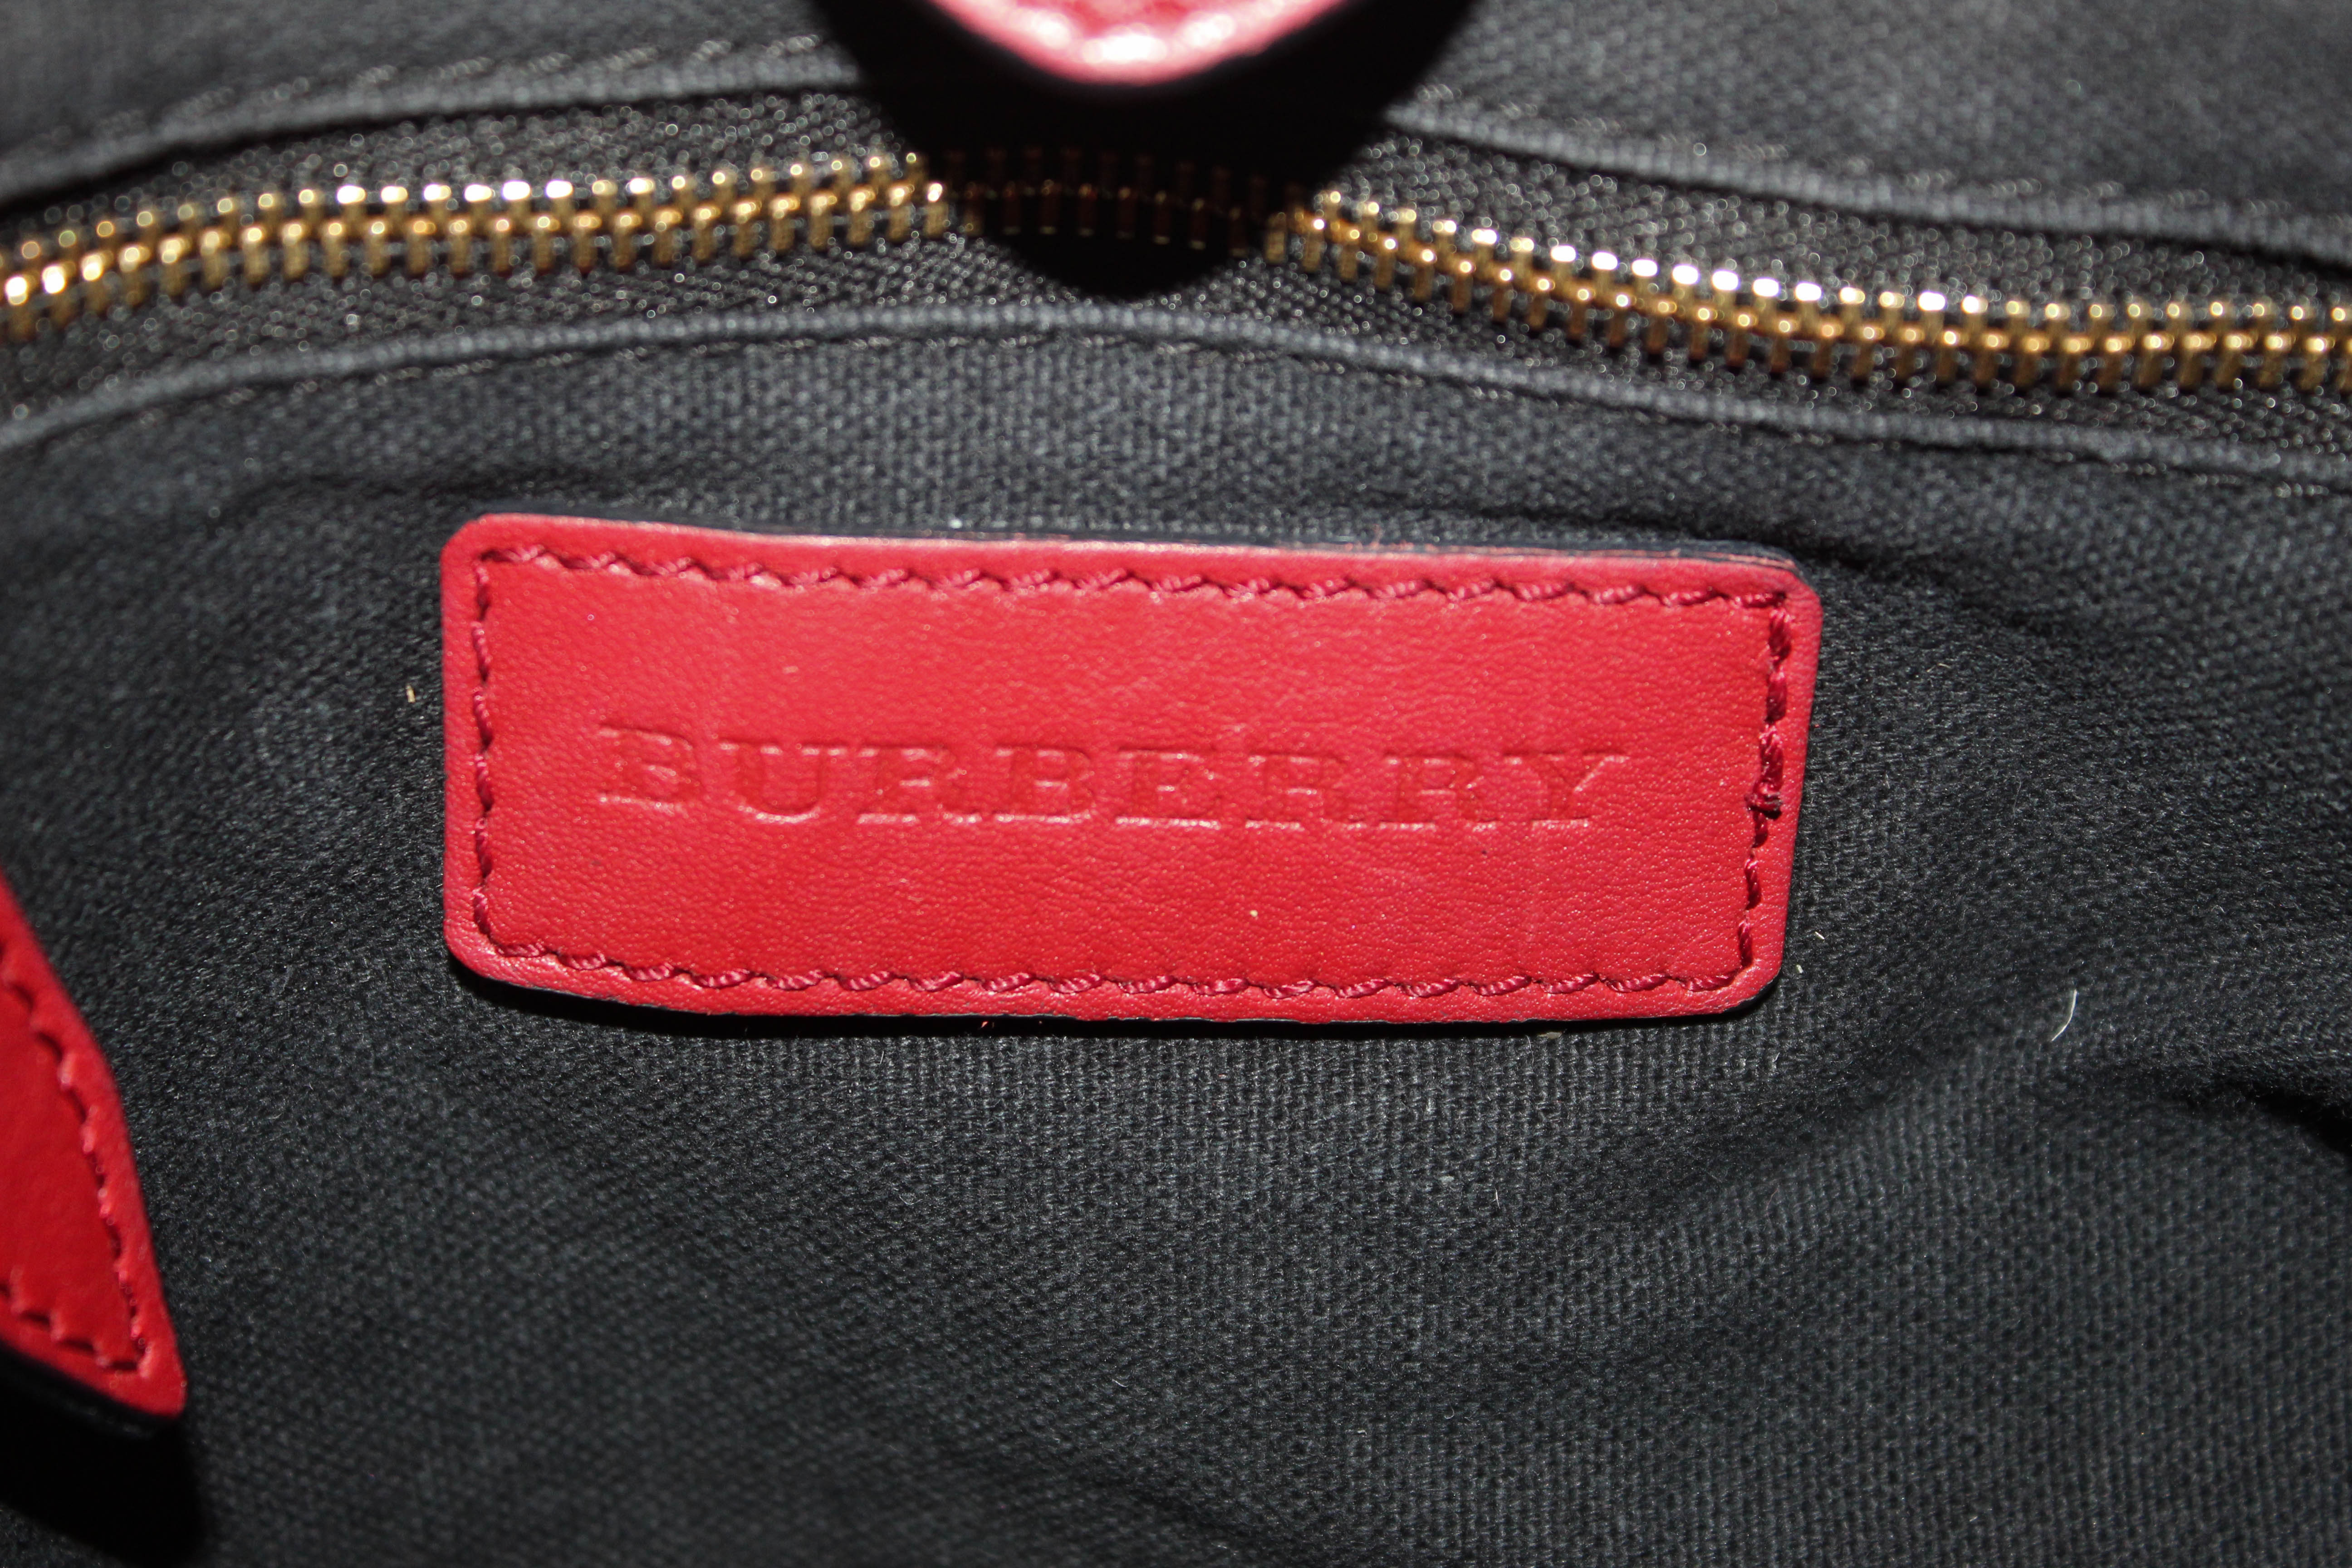 Burberry hand bag real vs fake review. How to spot counterfeit